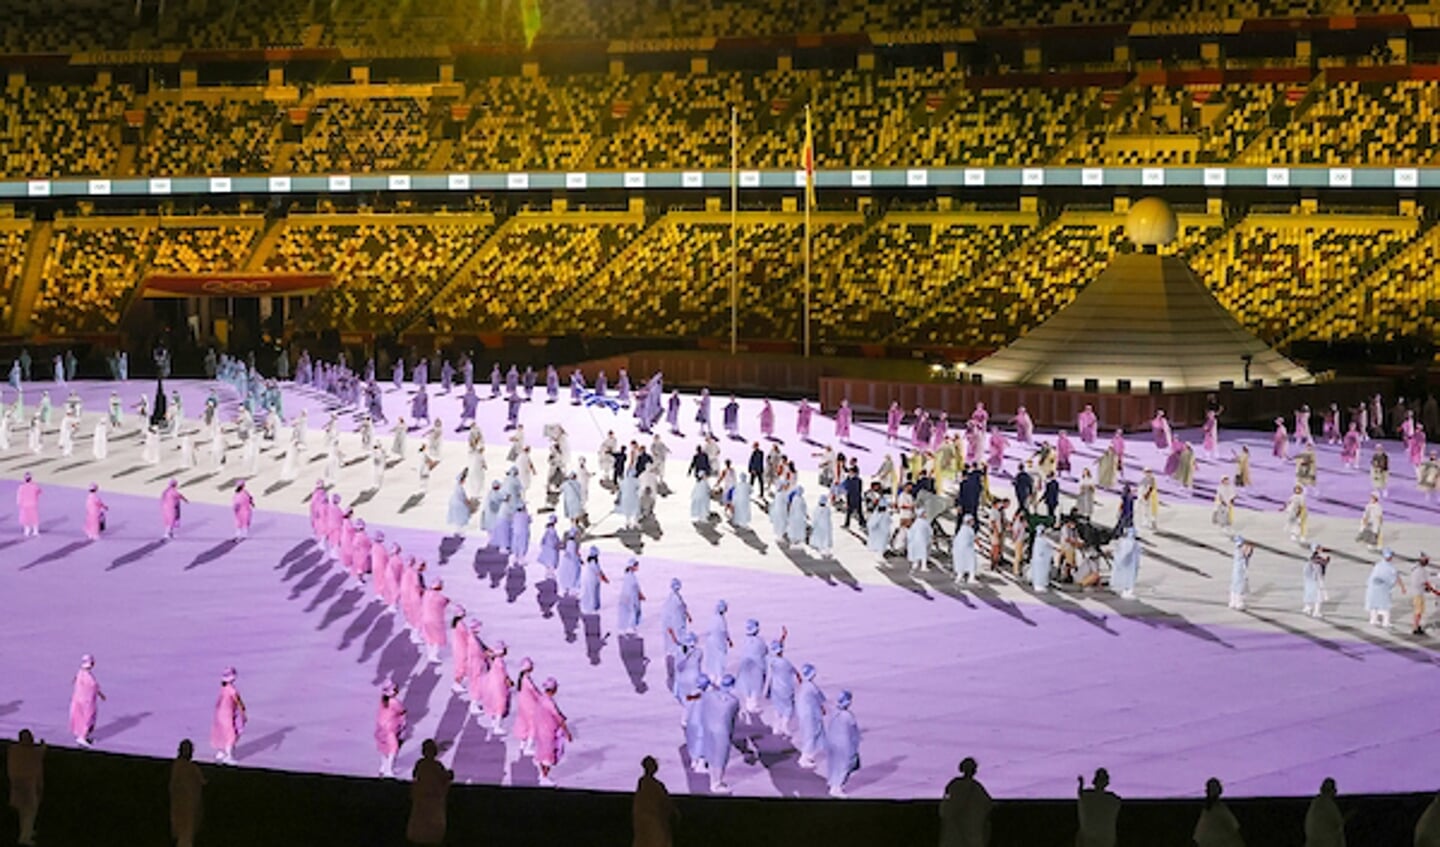 Opening Ceremony,
Olympic Games Tokyo 2021
© Hippo Foto - Dirk Caremans
23/07/2021